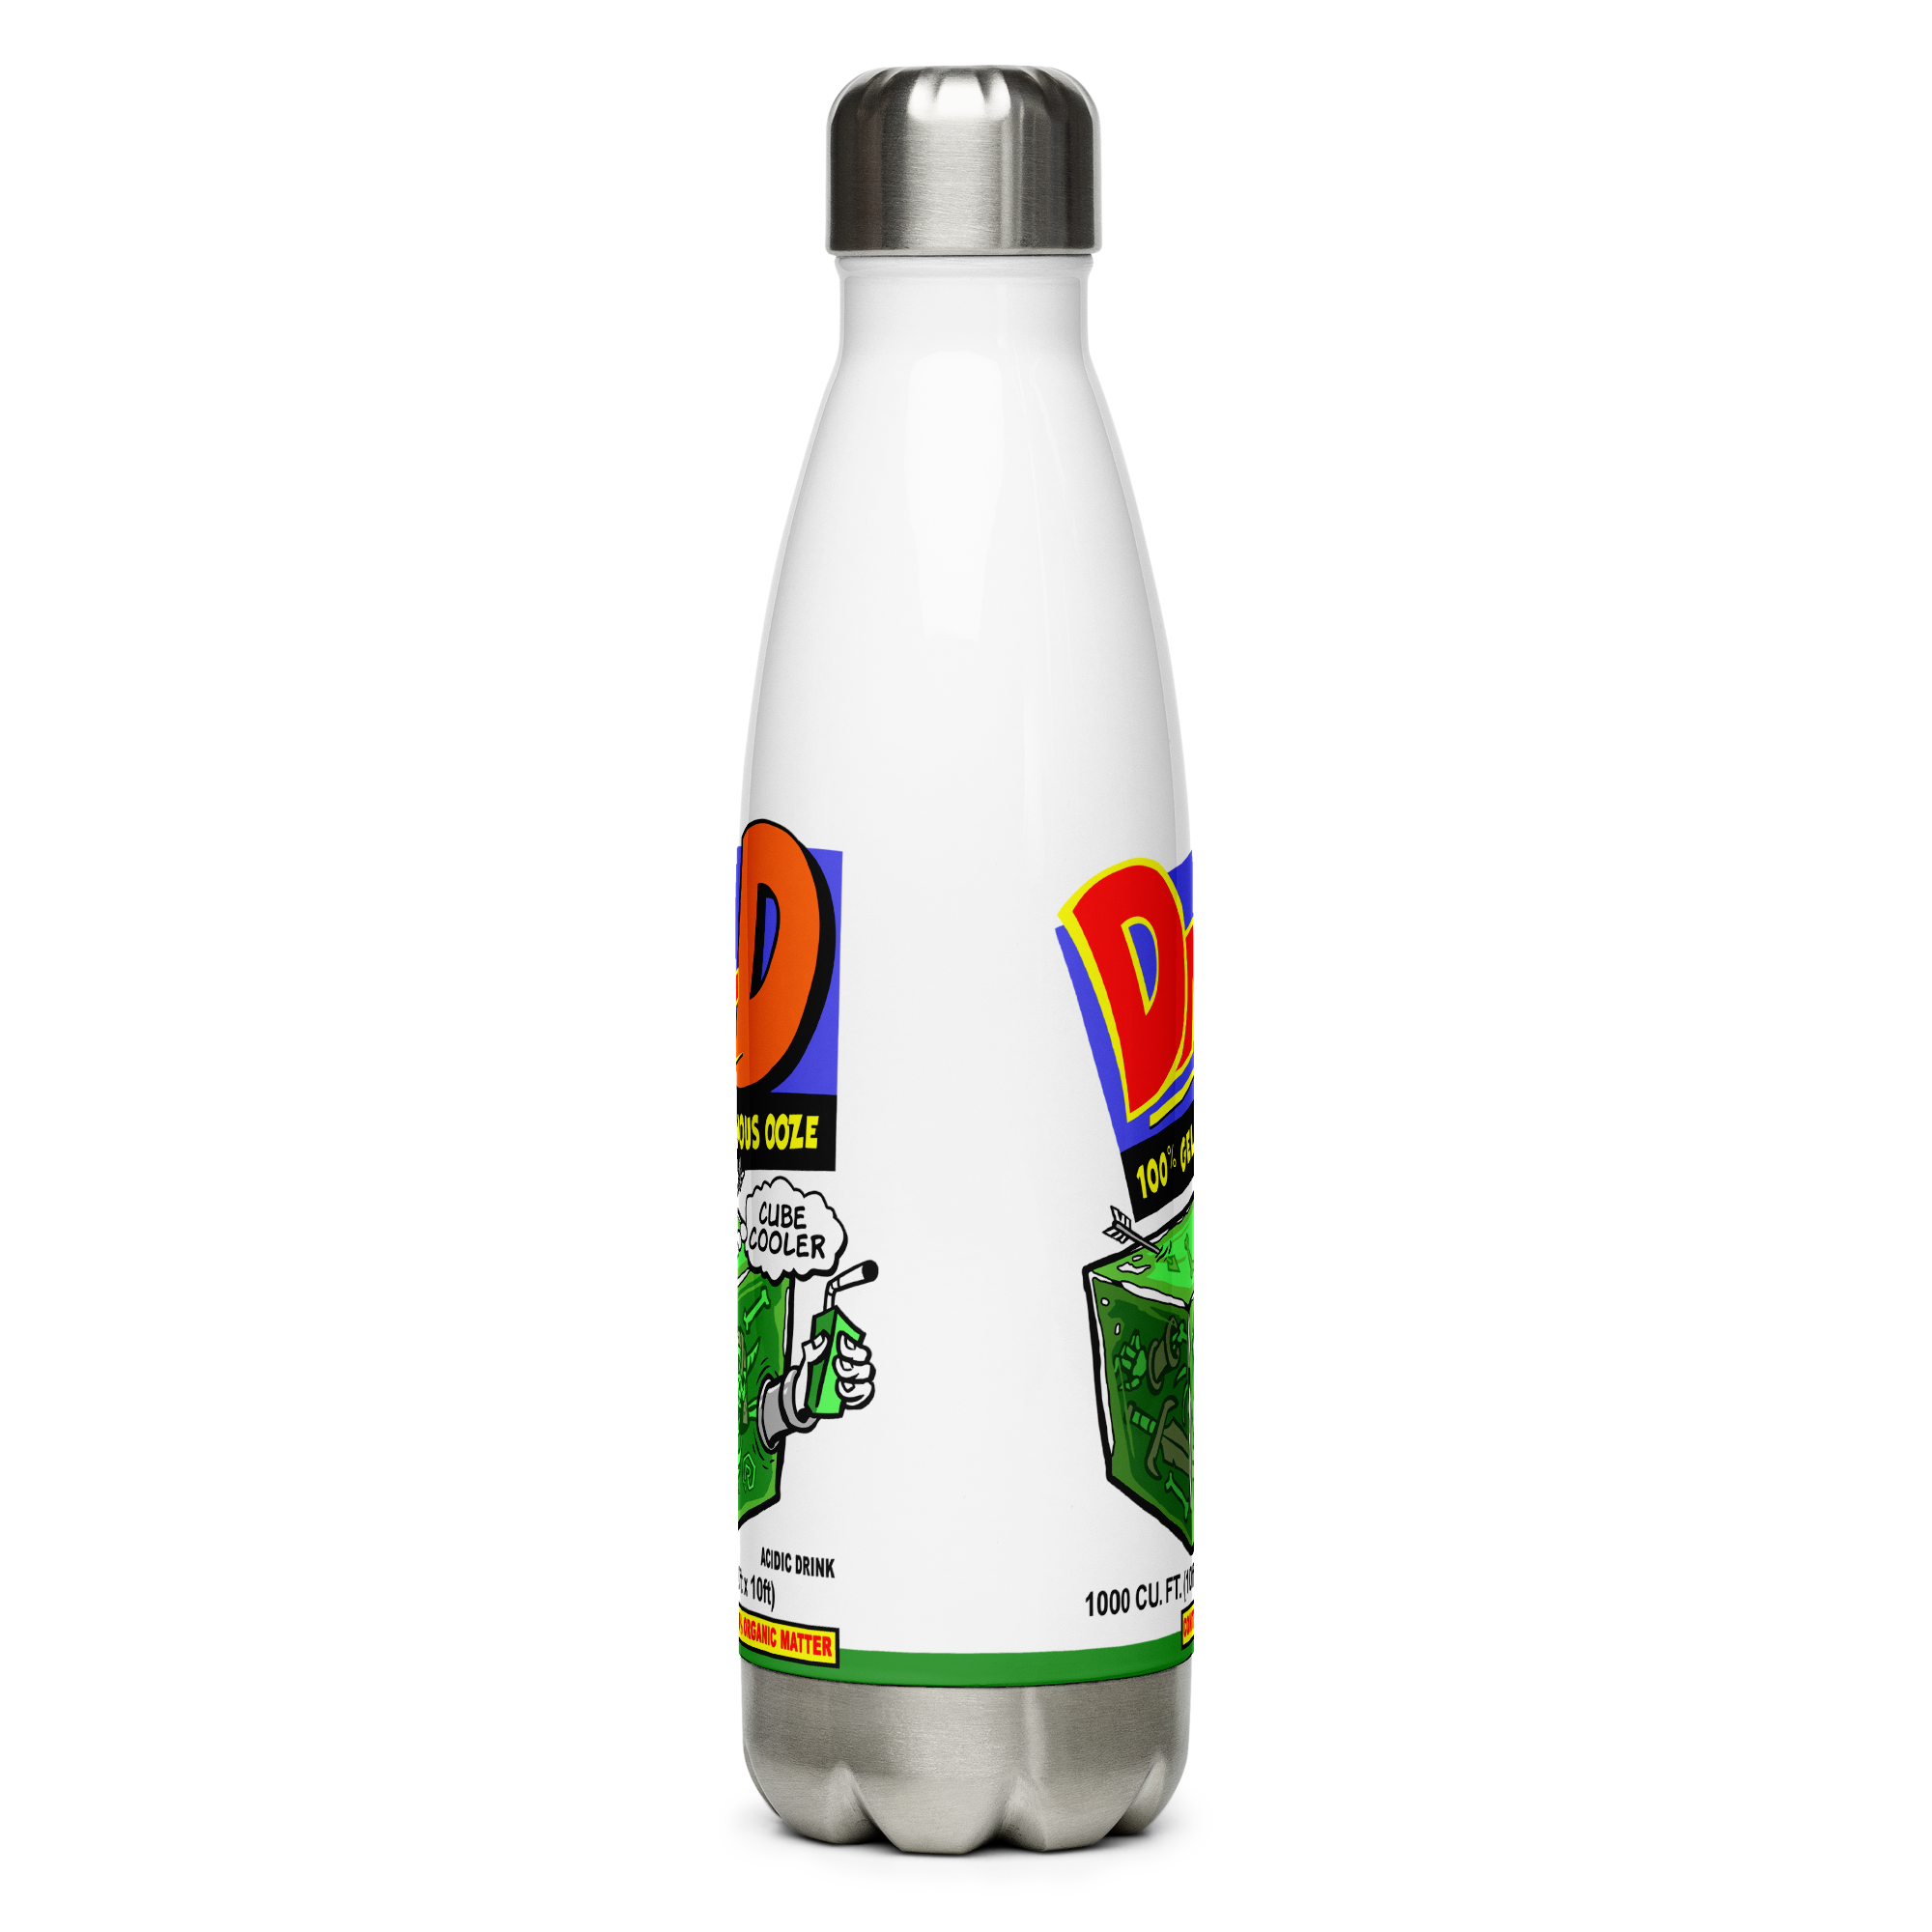 Gelatinous Cubic Cooler Stainless Steel Water Bottle | Rollacrit